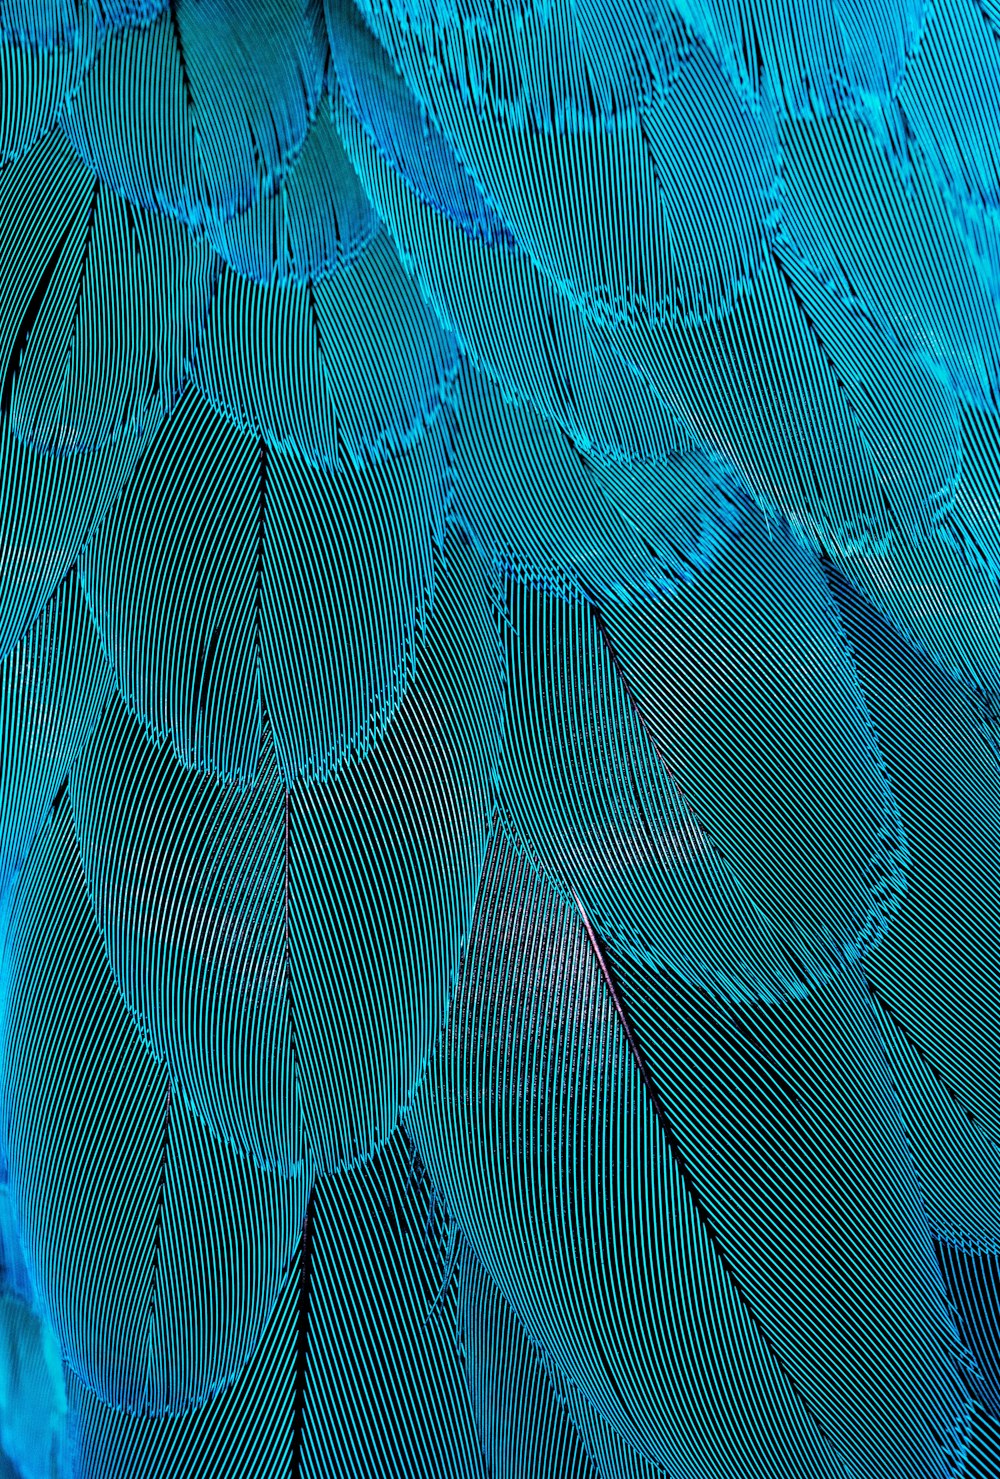  Blue Feathers